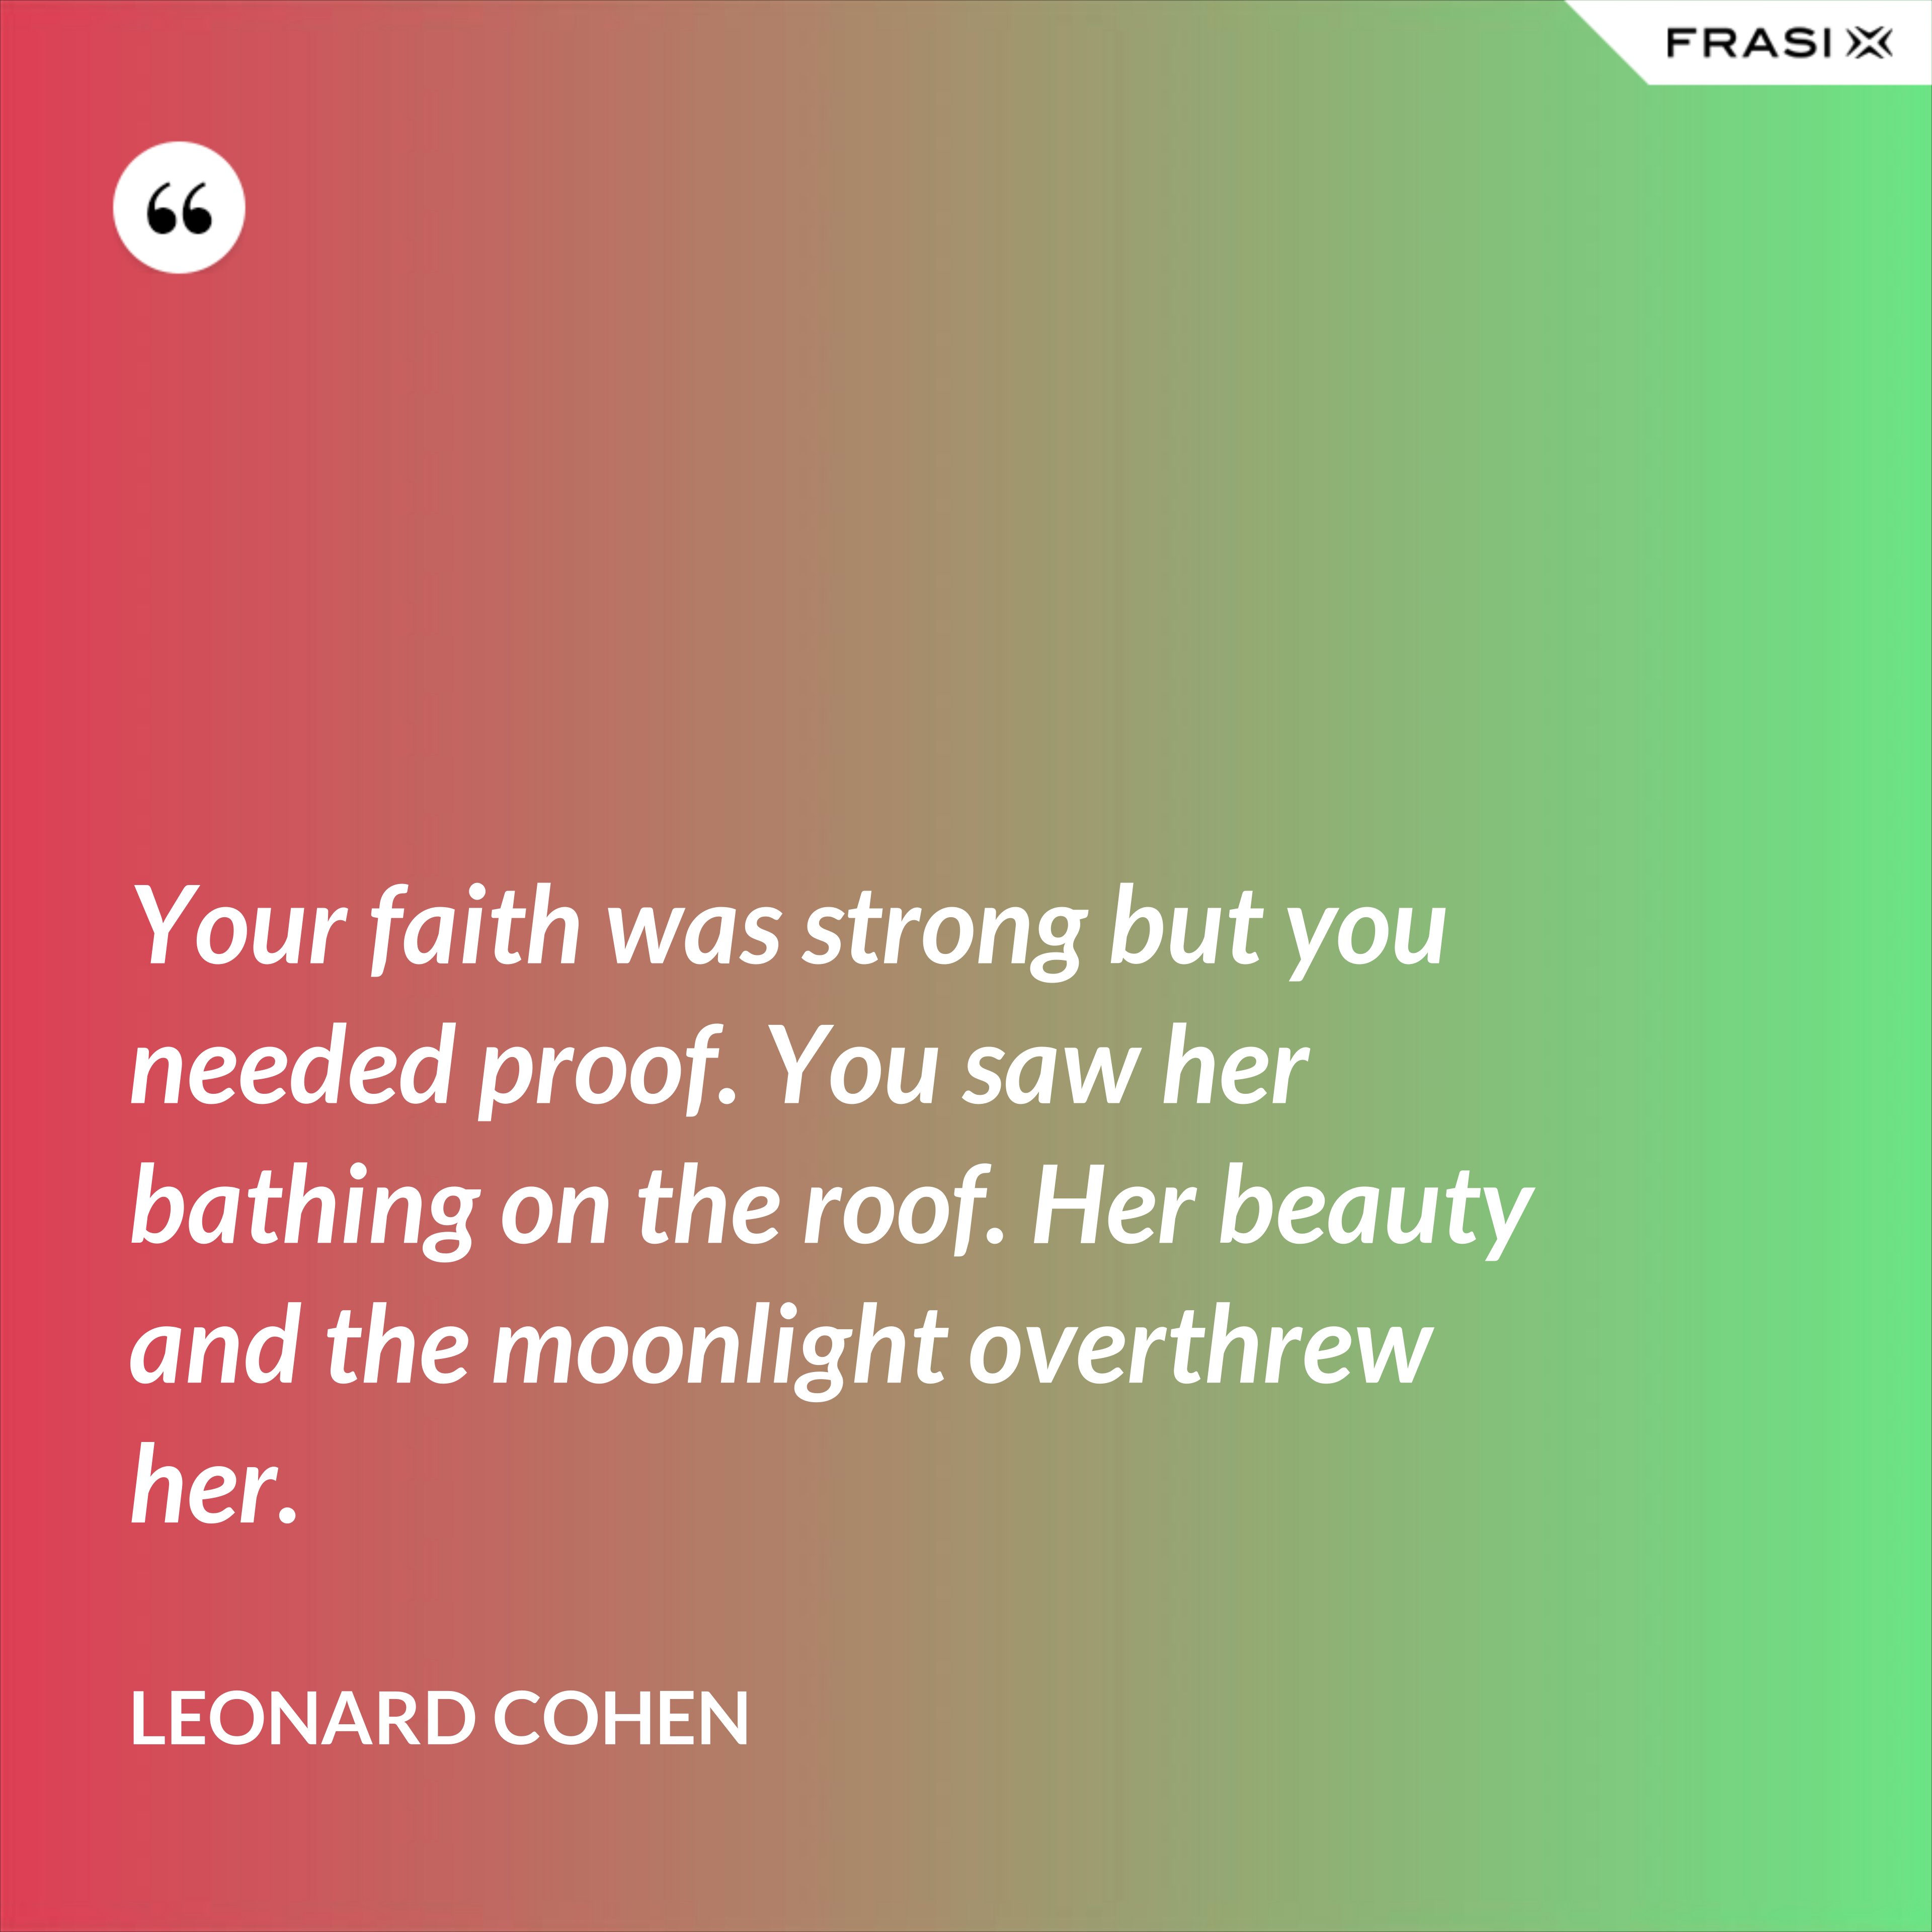 Your faith was strong but you needed proof. You saw her bathing on the roof. Her beauty and the moonlight overthrew her. - Leonard Cohen